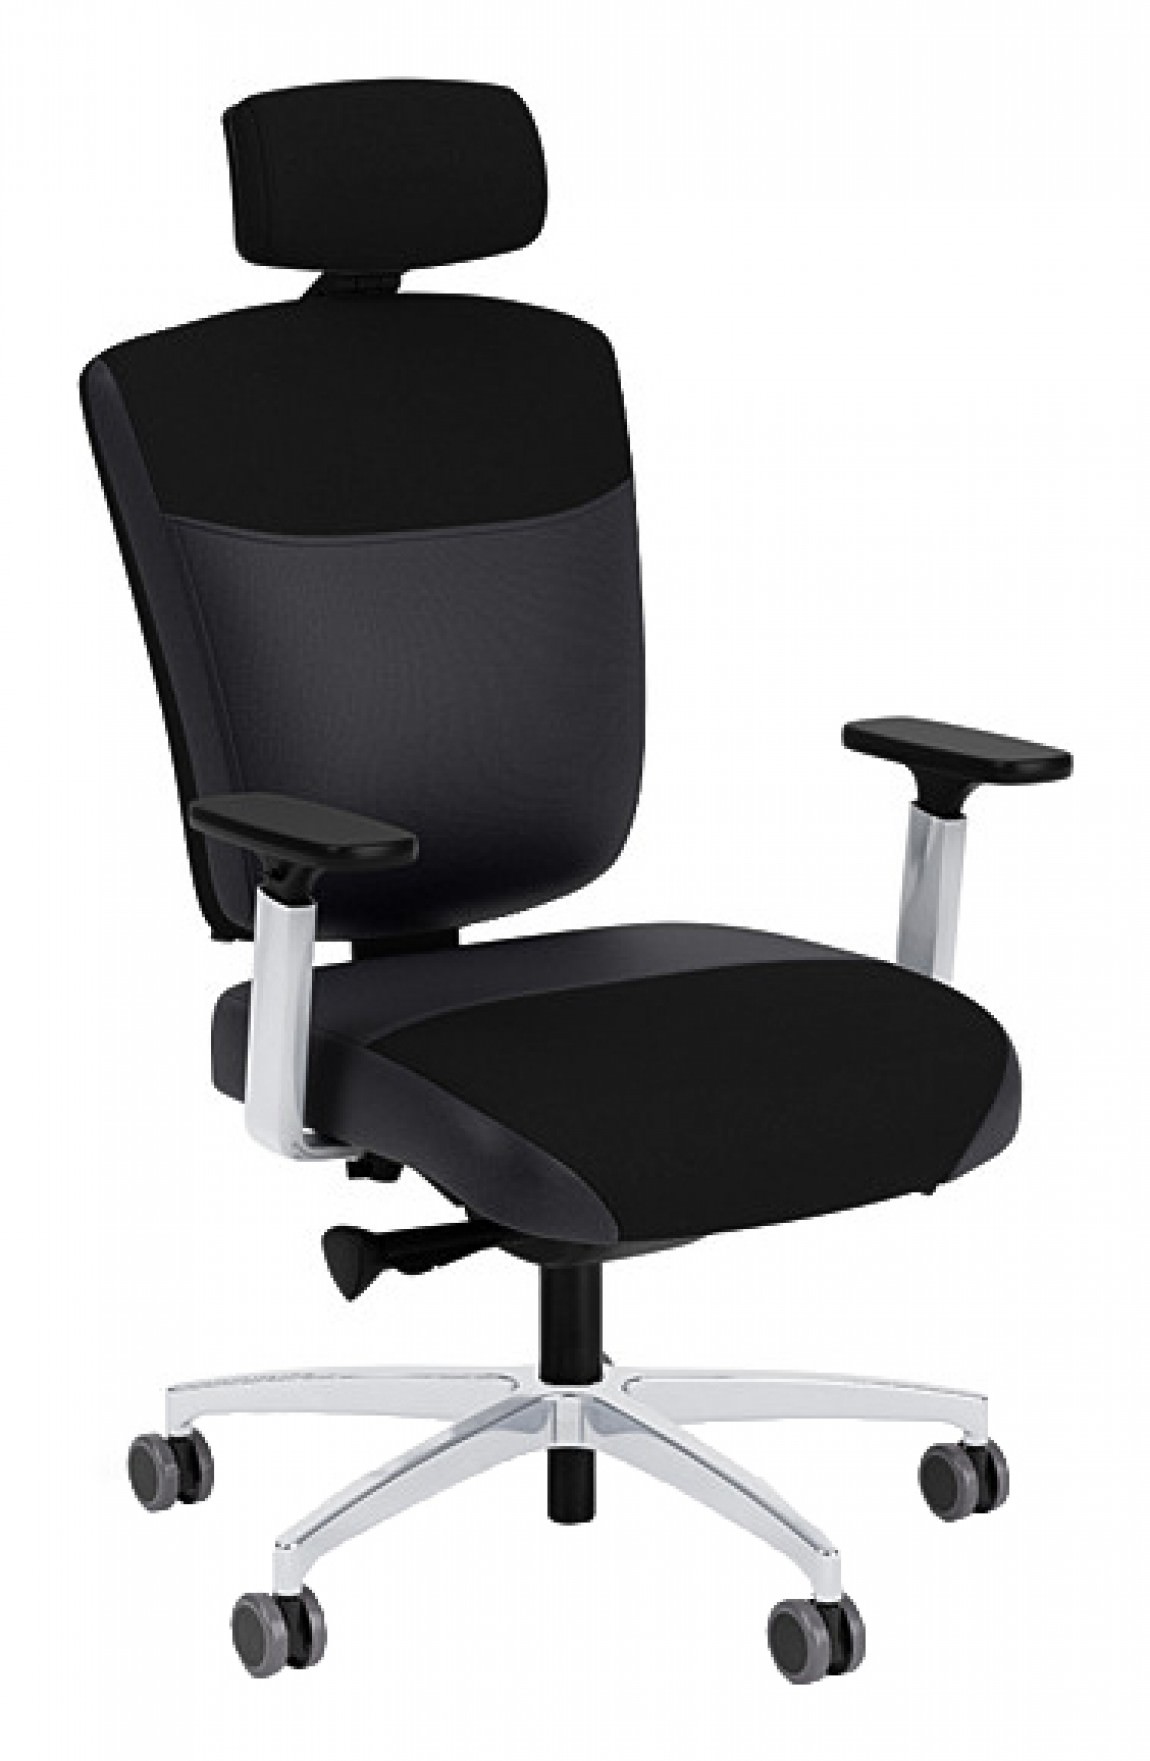 Office Chair with Lumbar Support - Black - Brisbane HD by Via Seating